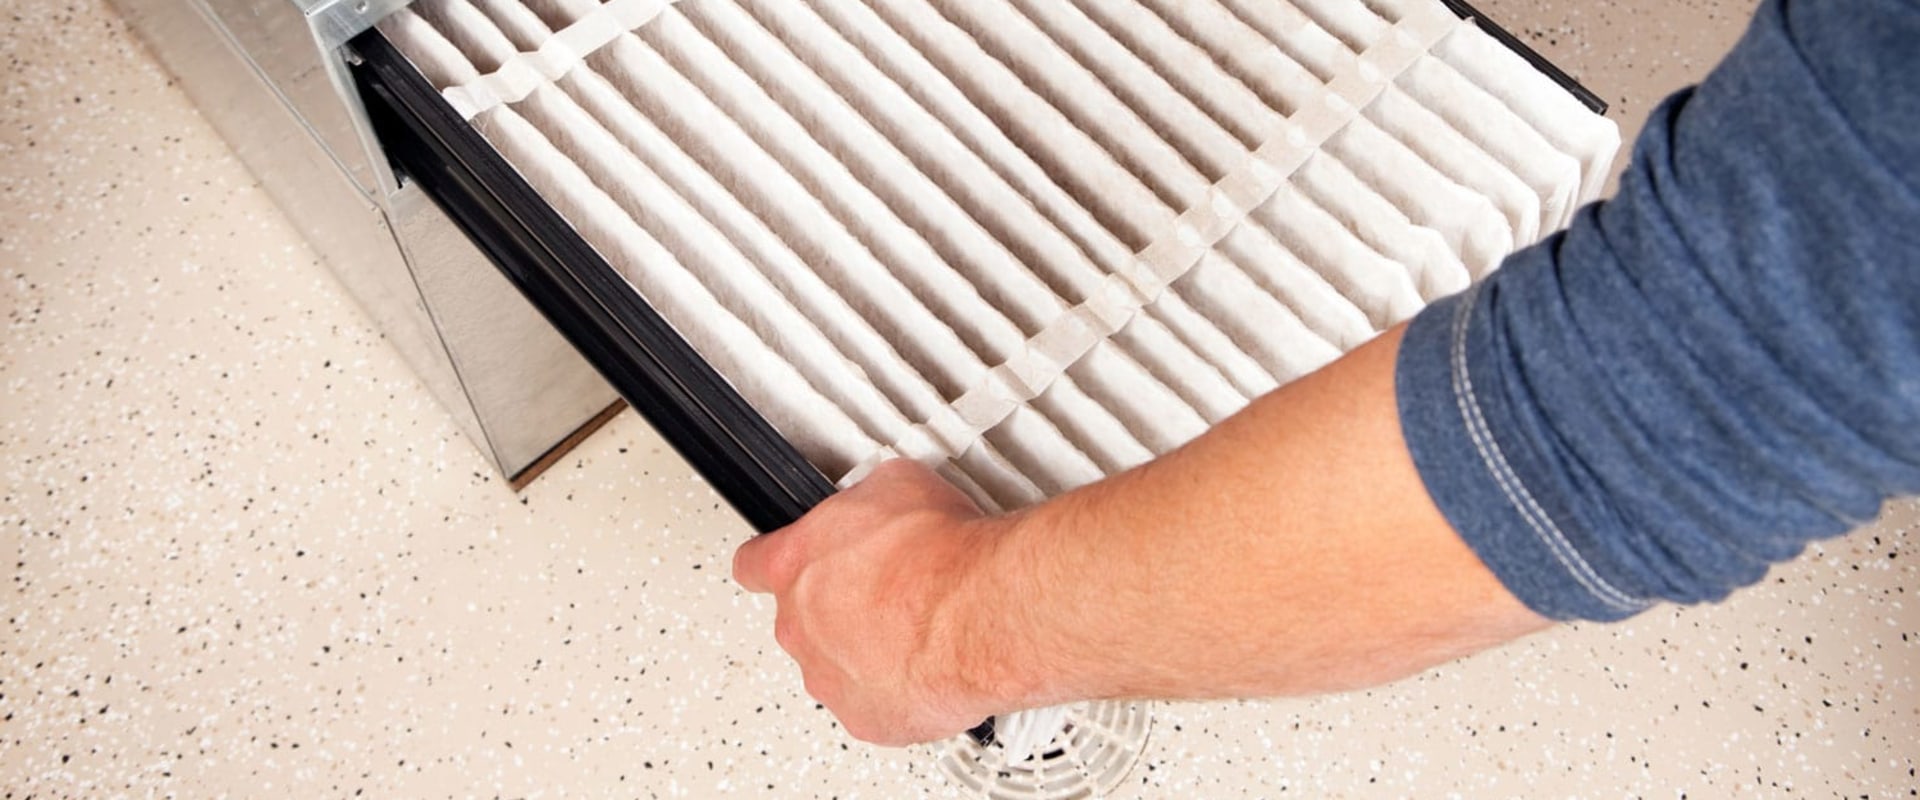 How to Change Your Furnace Air Filter Easily